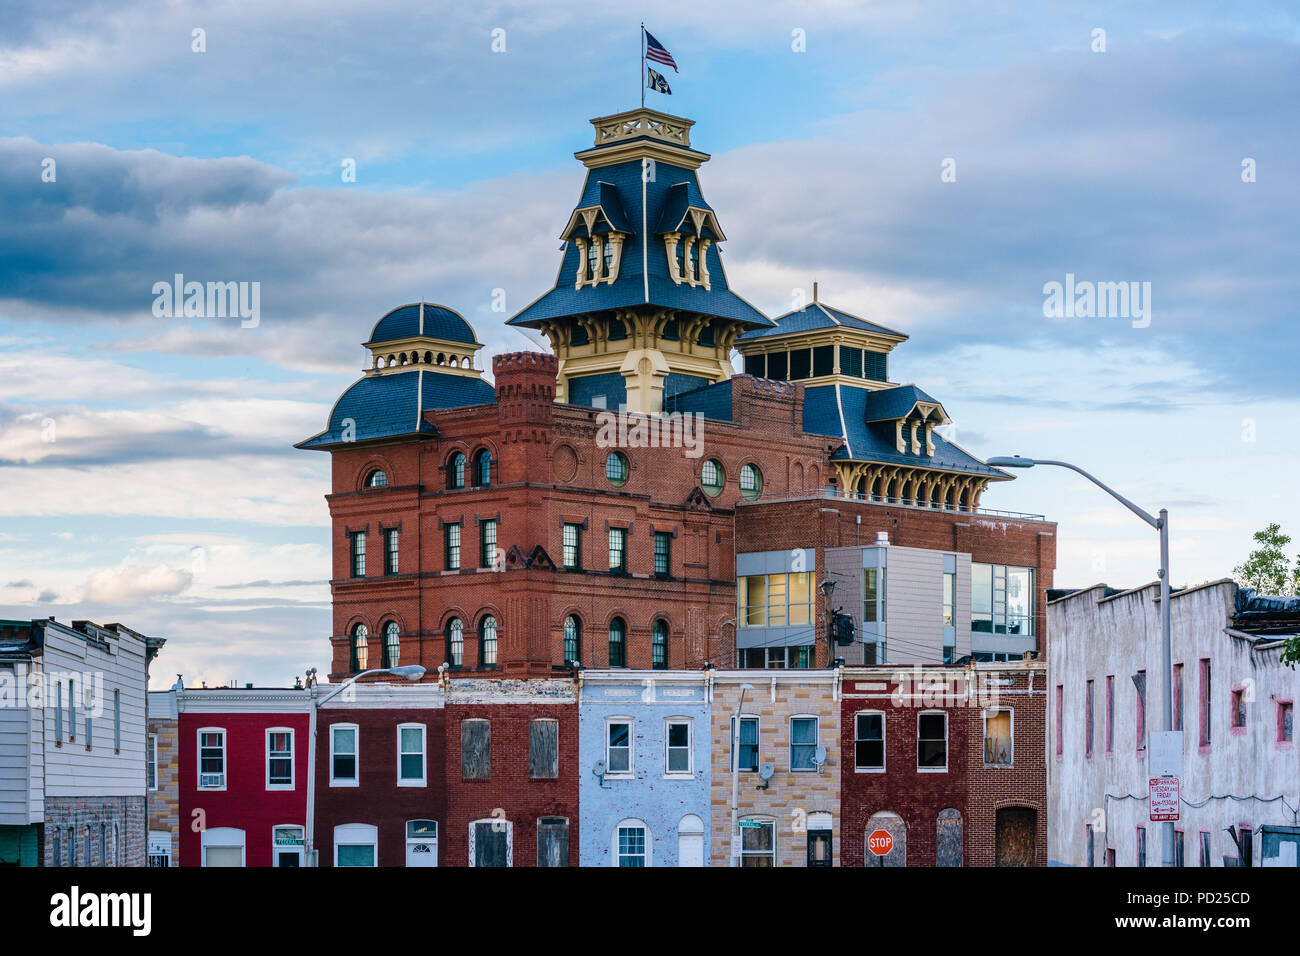 Federal Street row houses and the American Brewery Building in Baltimore, Maryland Stock Photo